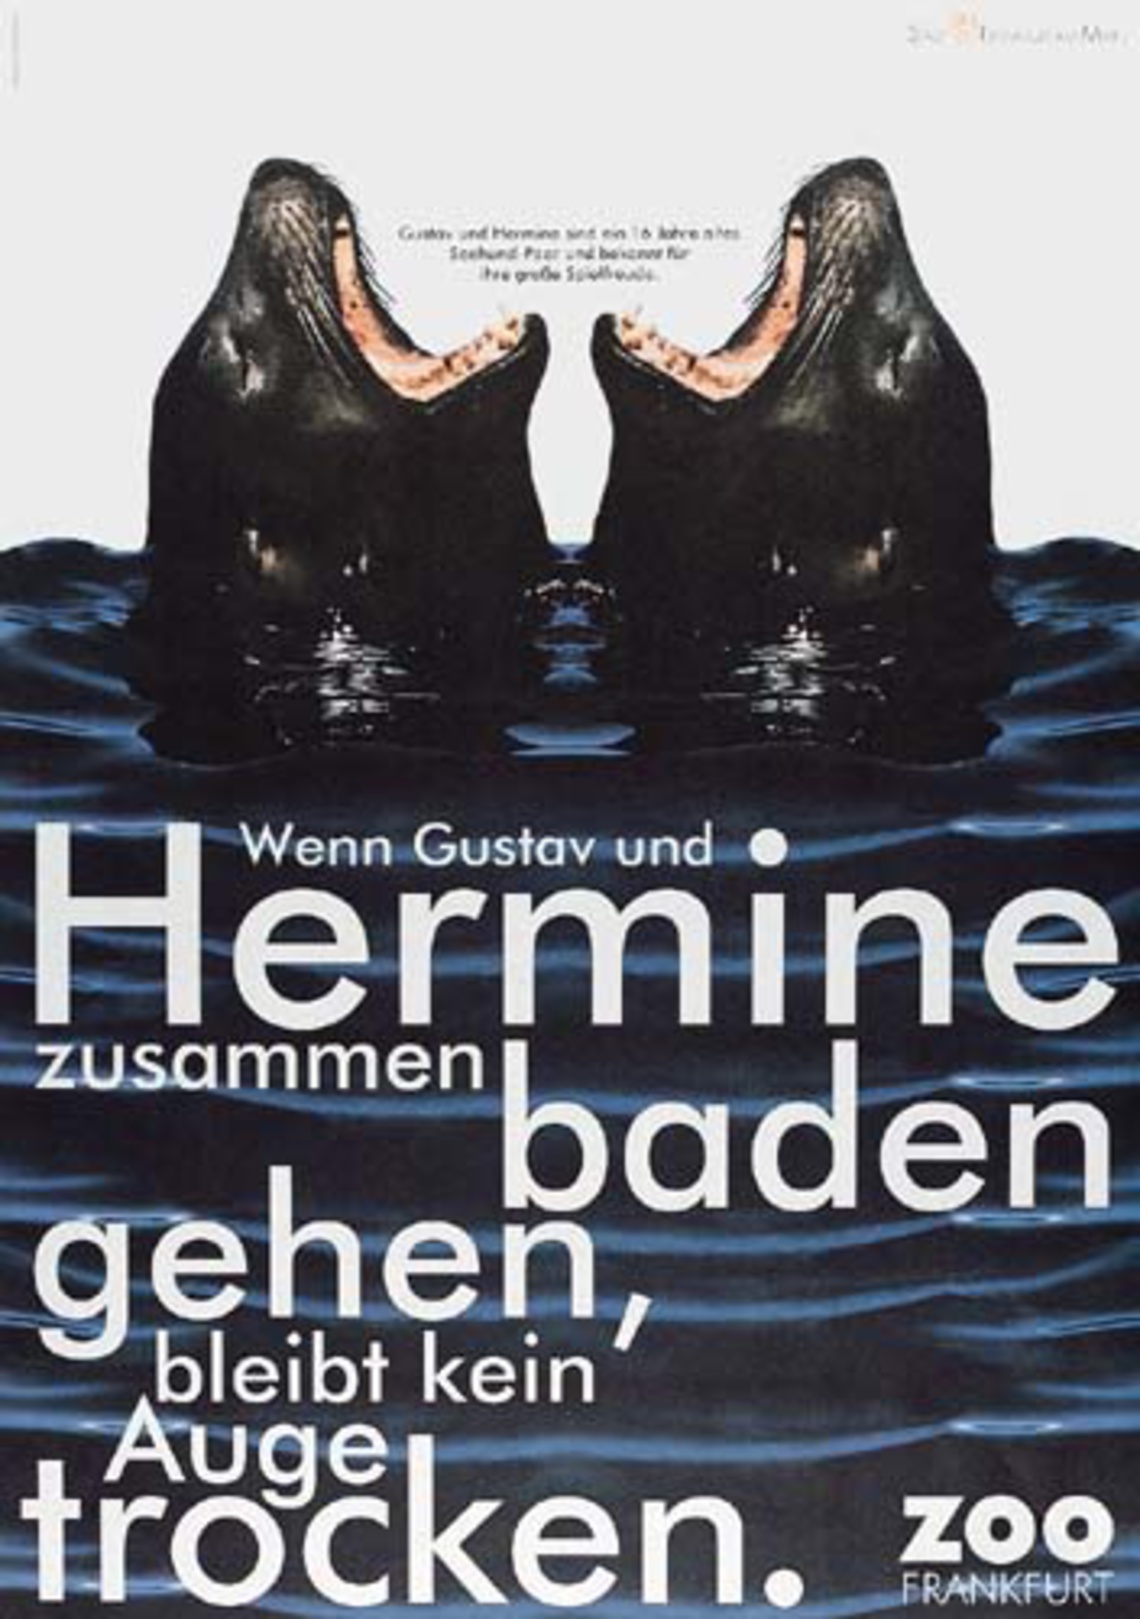 When Gustav and Hermine take a bath there´s not a dry eye in the house.